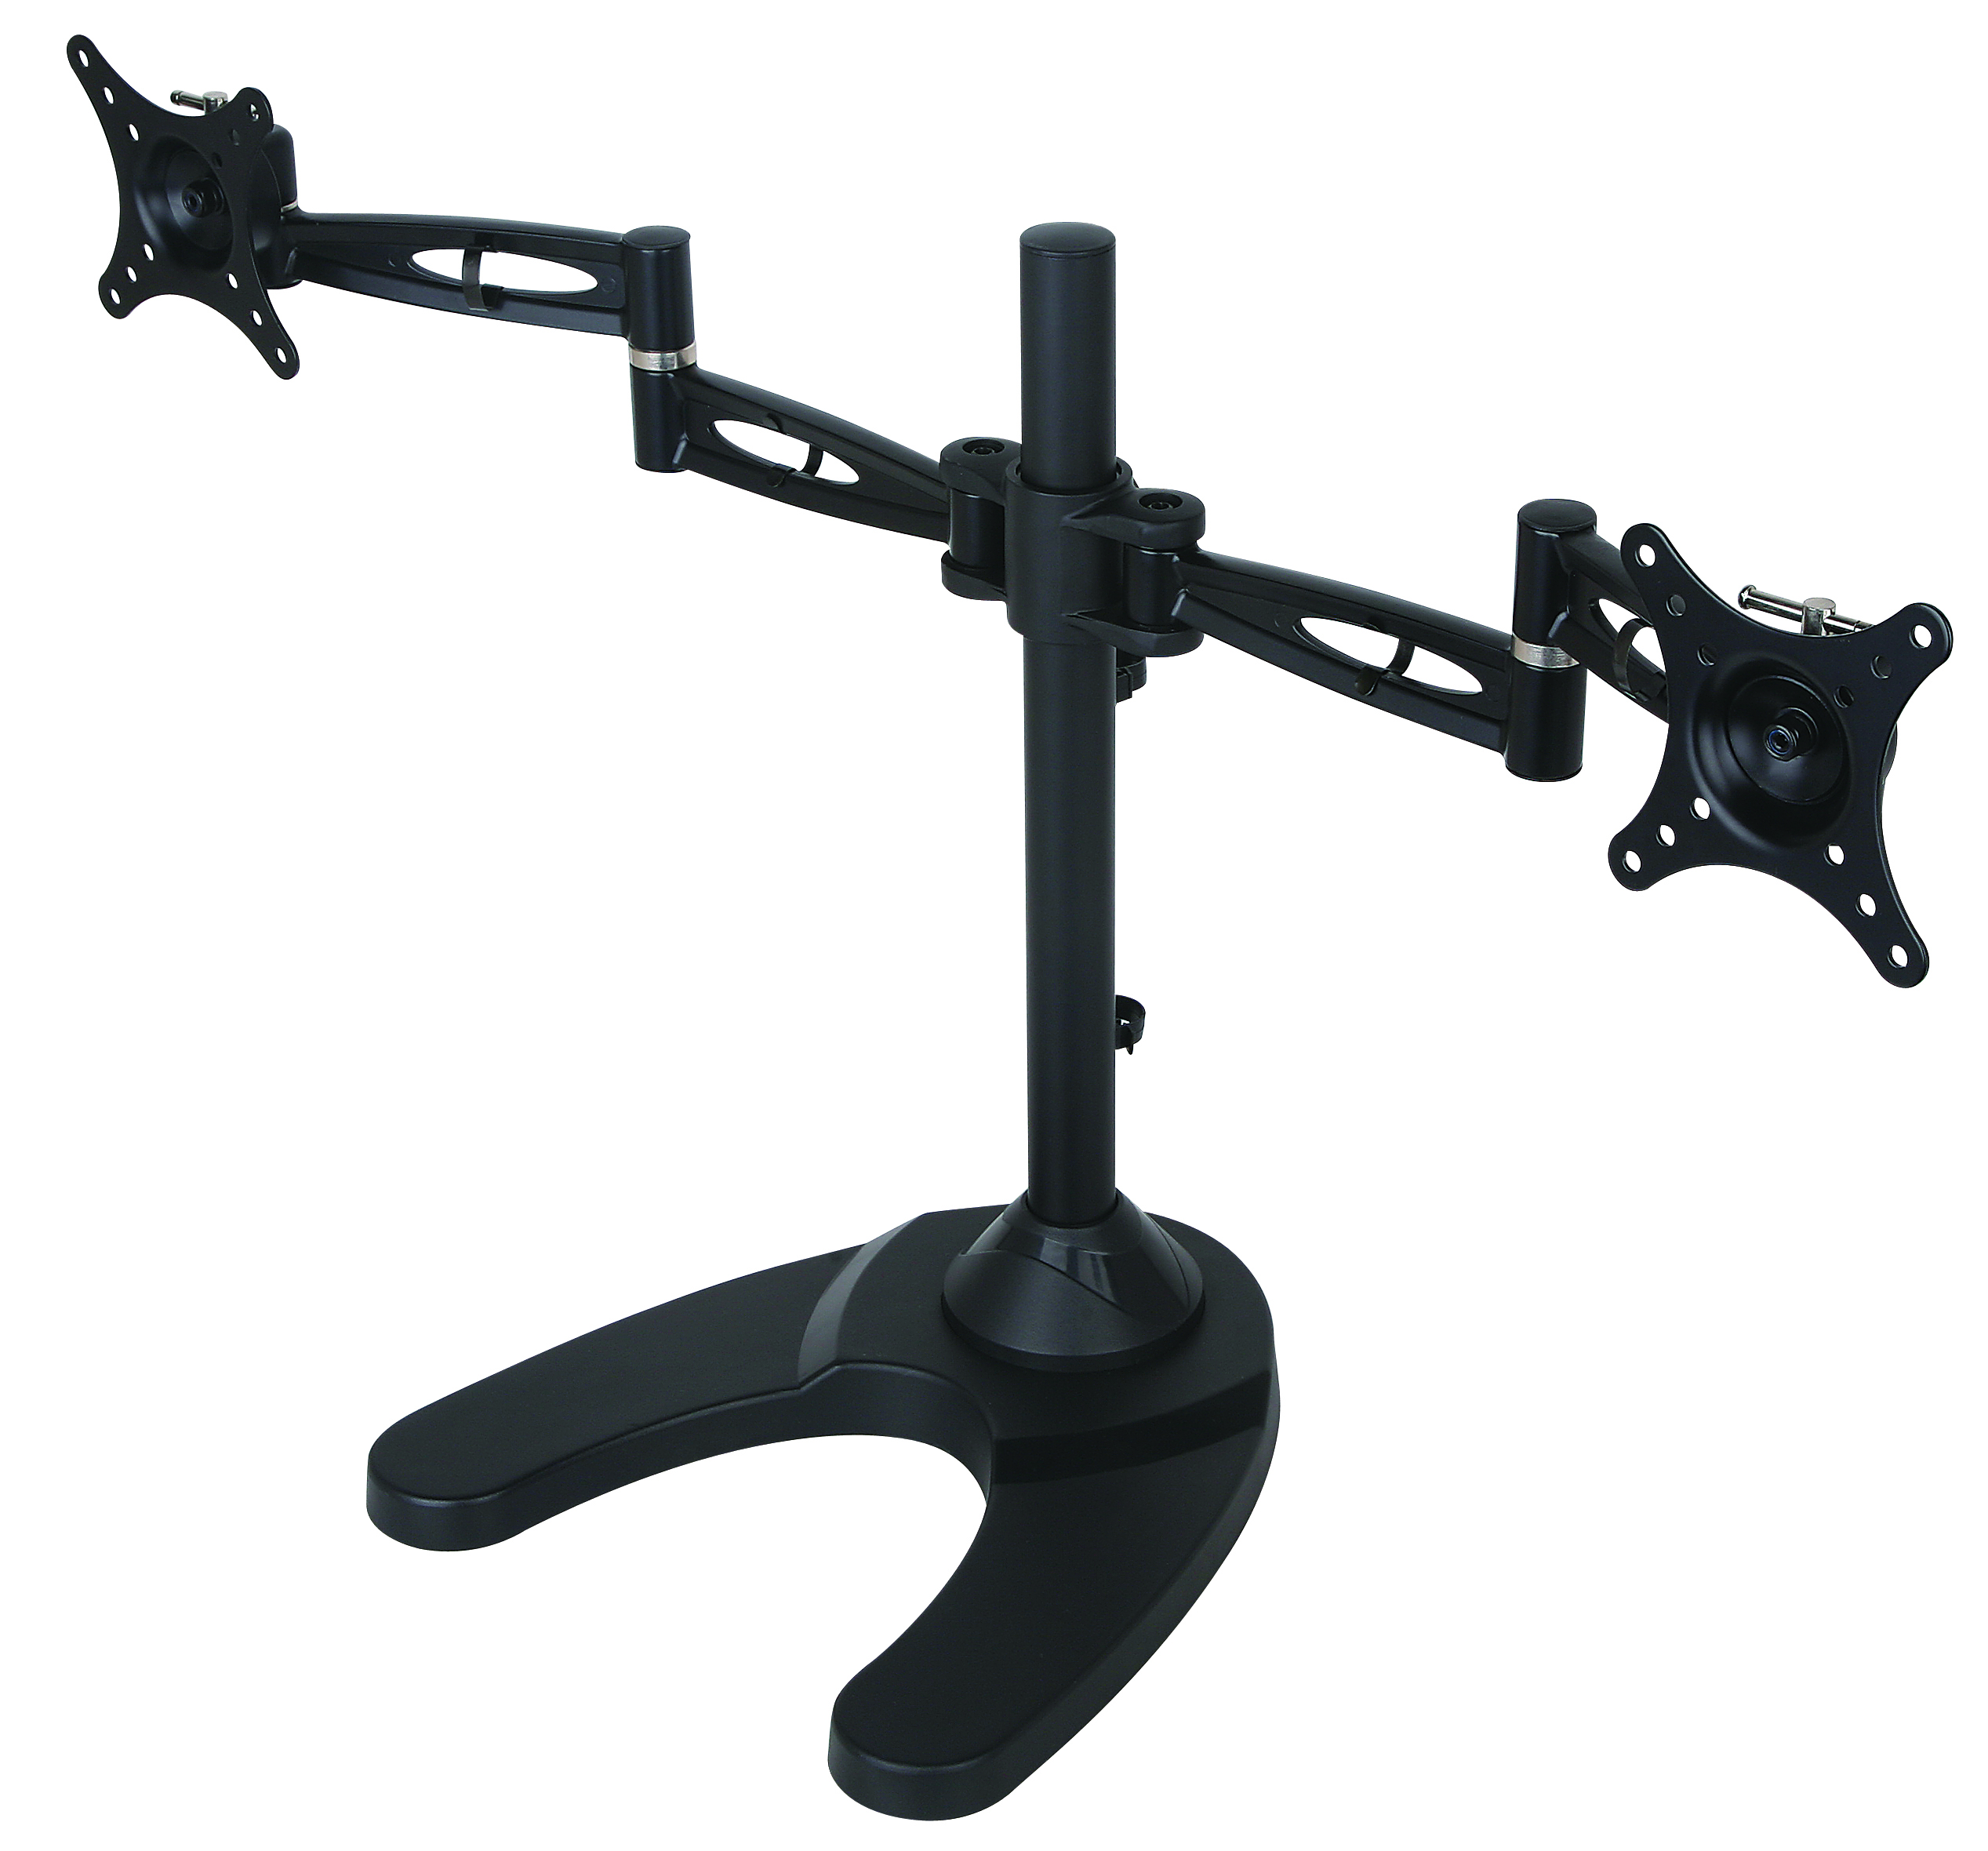 Dual LCD Monitor Desk Mount Stand Heavy Duty Fully Adjustable 2 Screens upto 27"